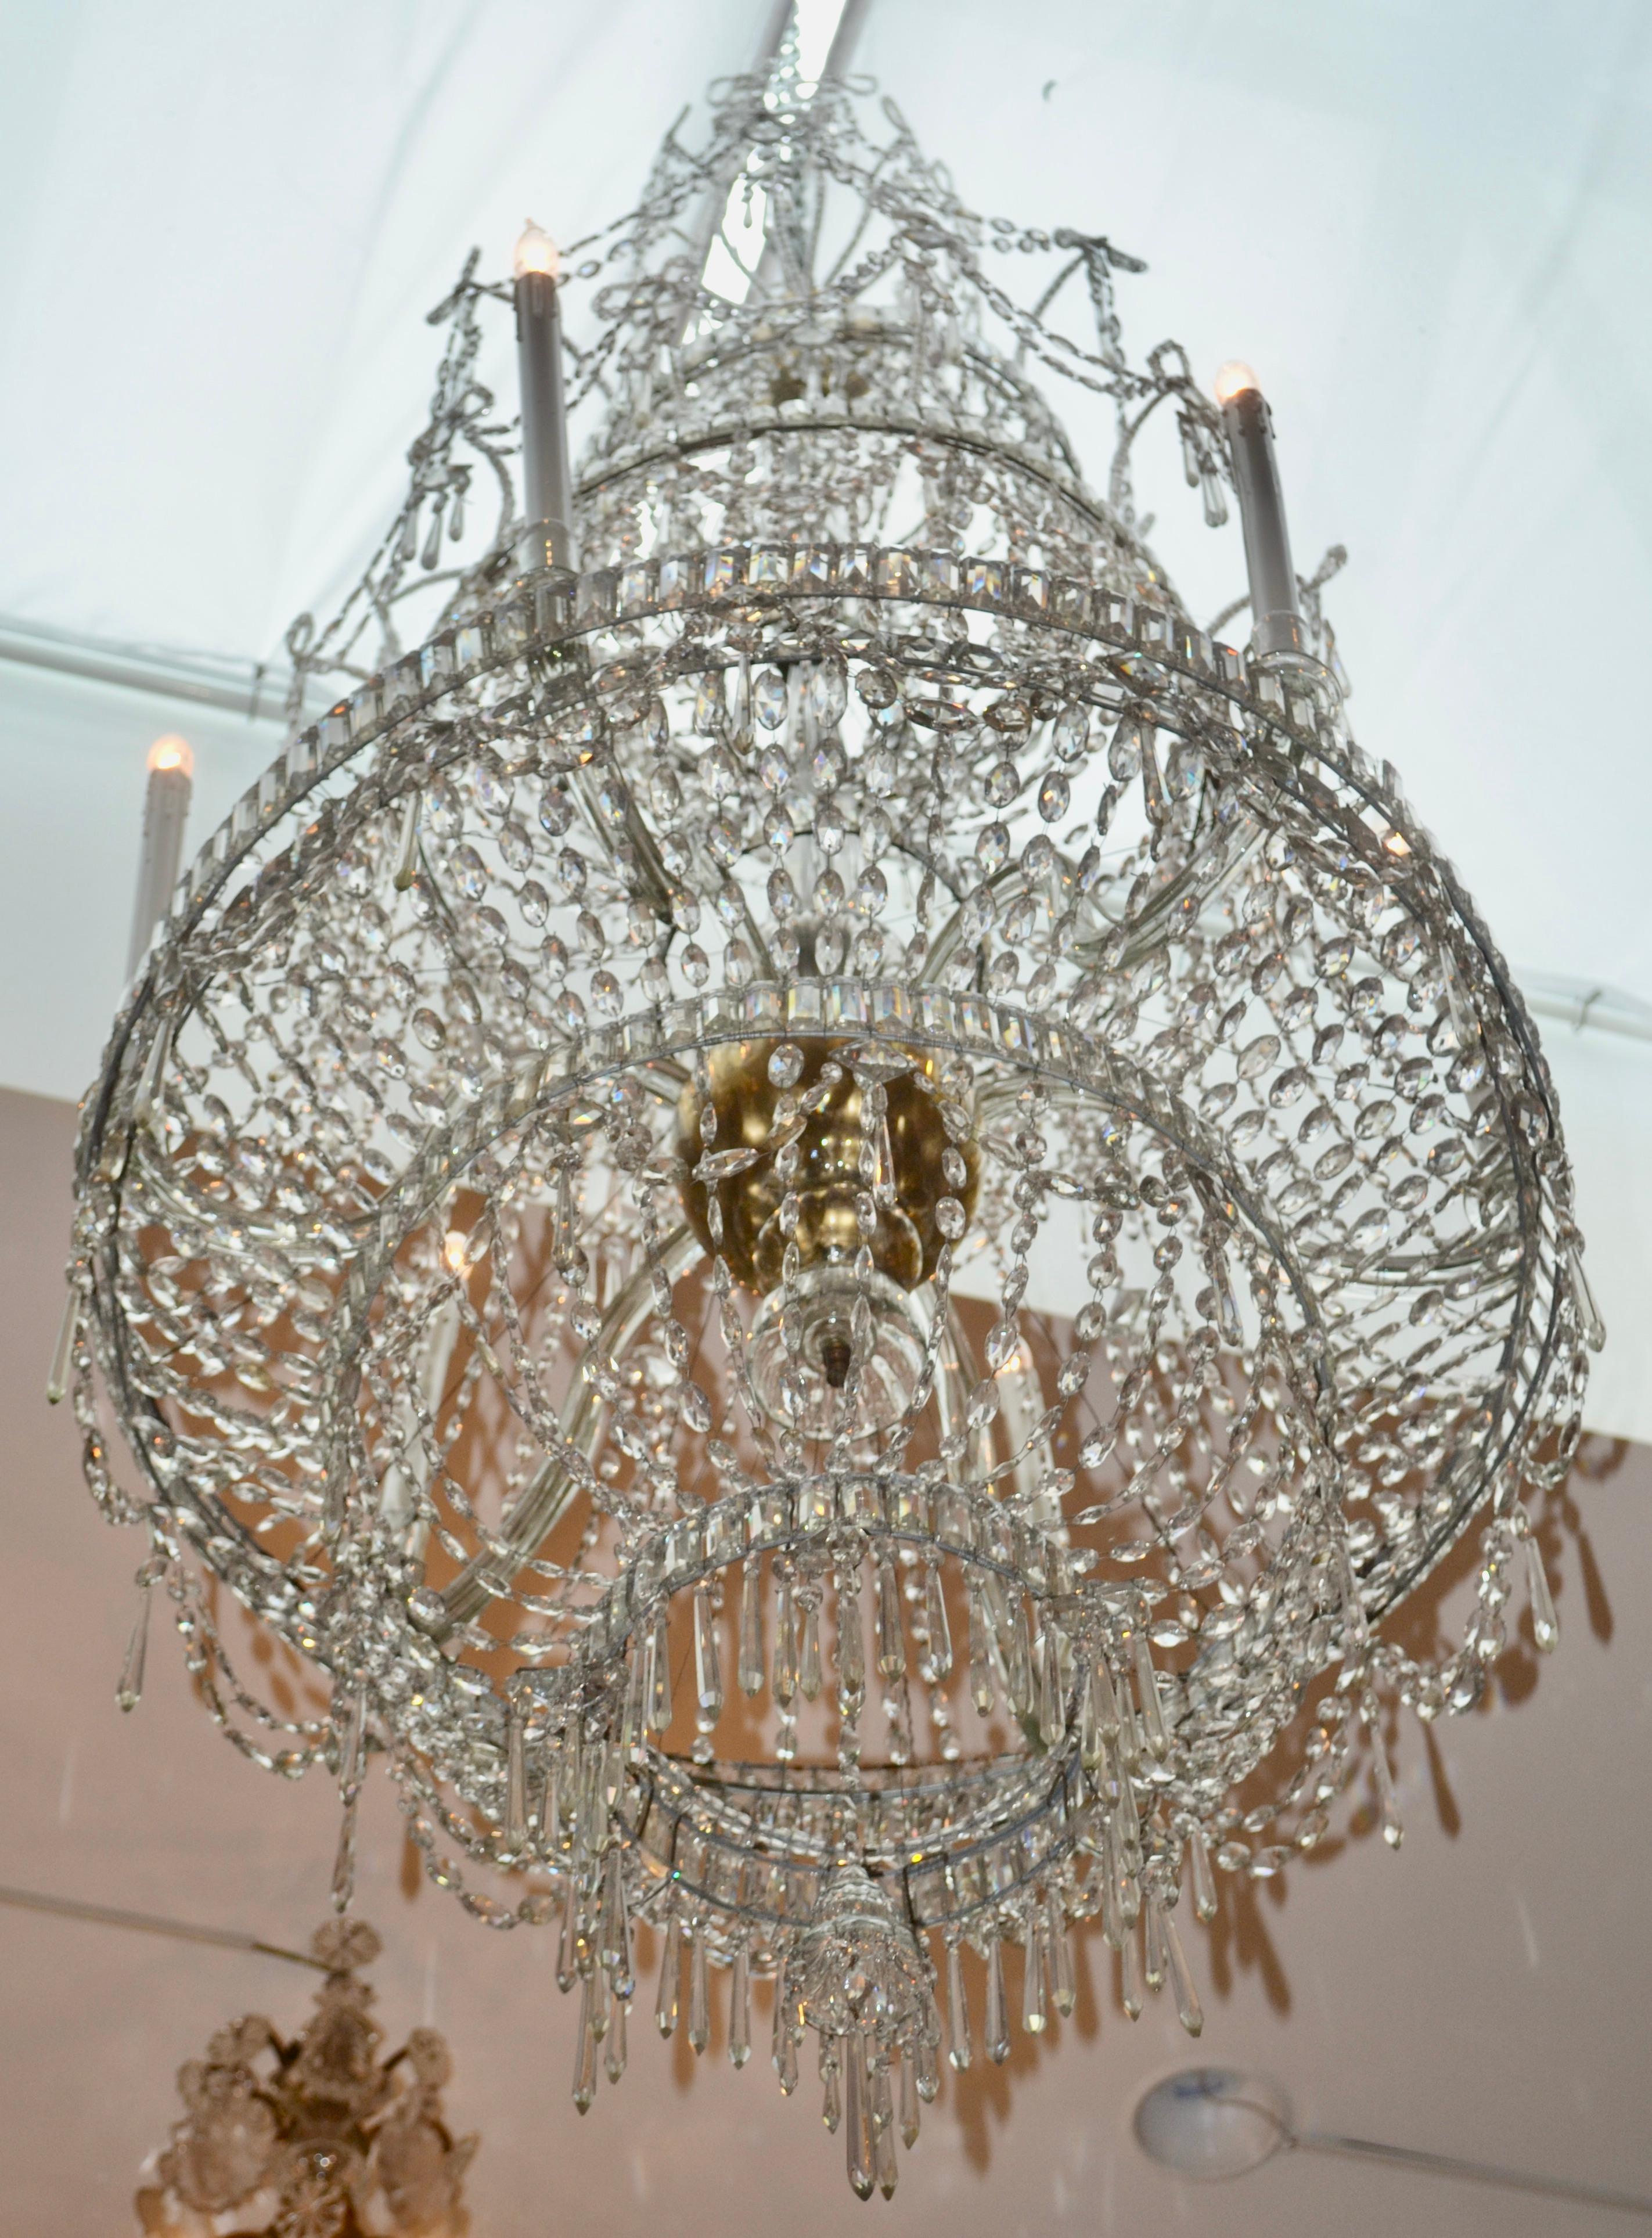 Spanish 18th Century Crystal Chandelier from the Royal Crystal Manufacturer La Granja For Sale